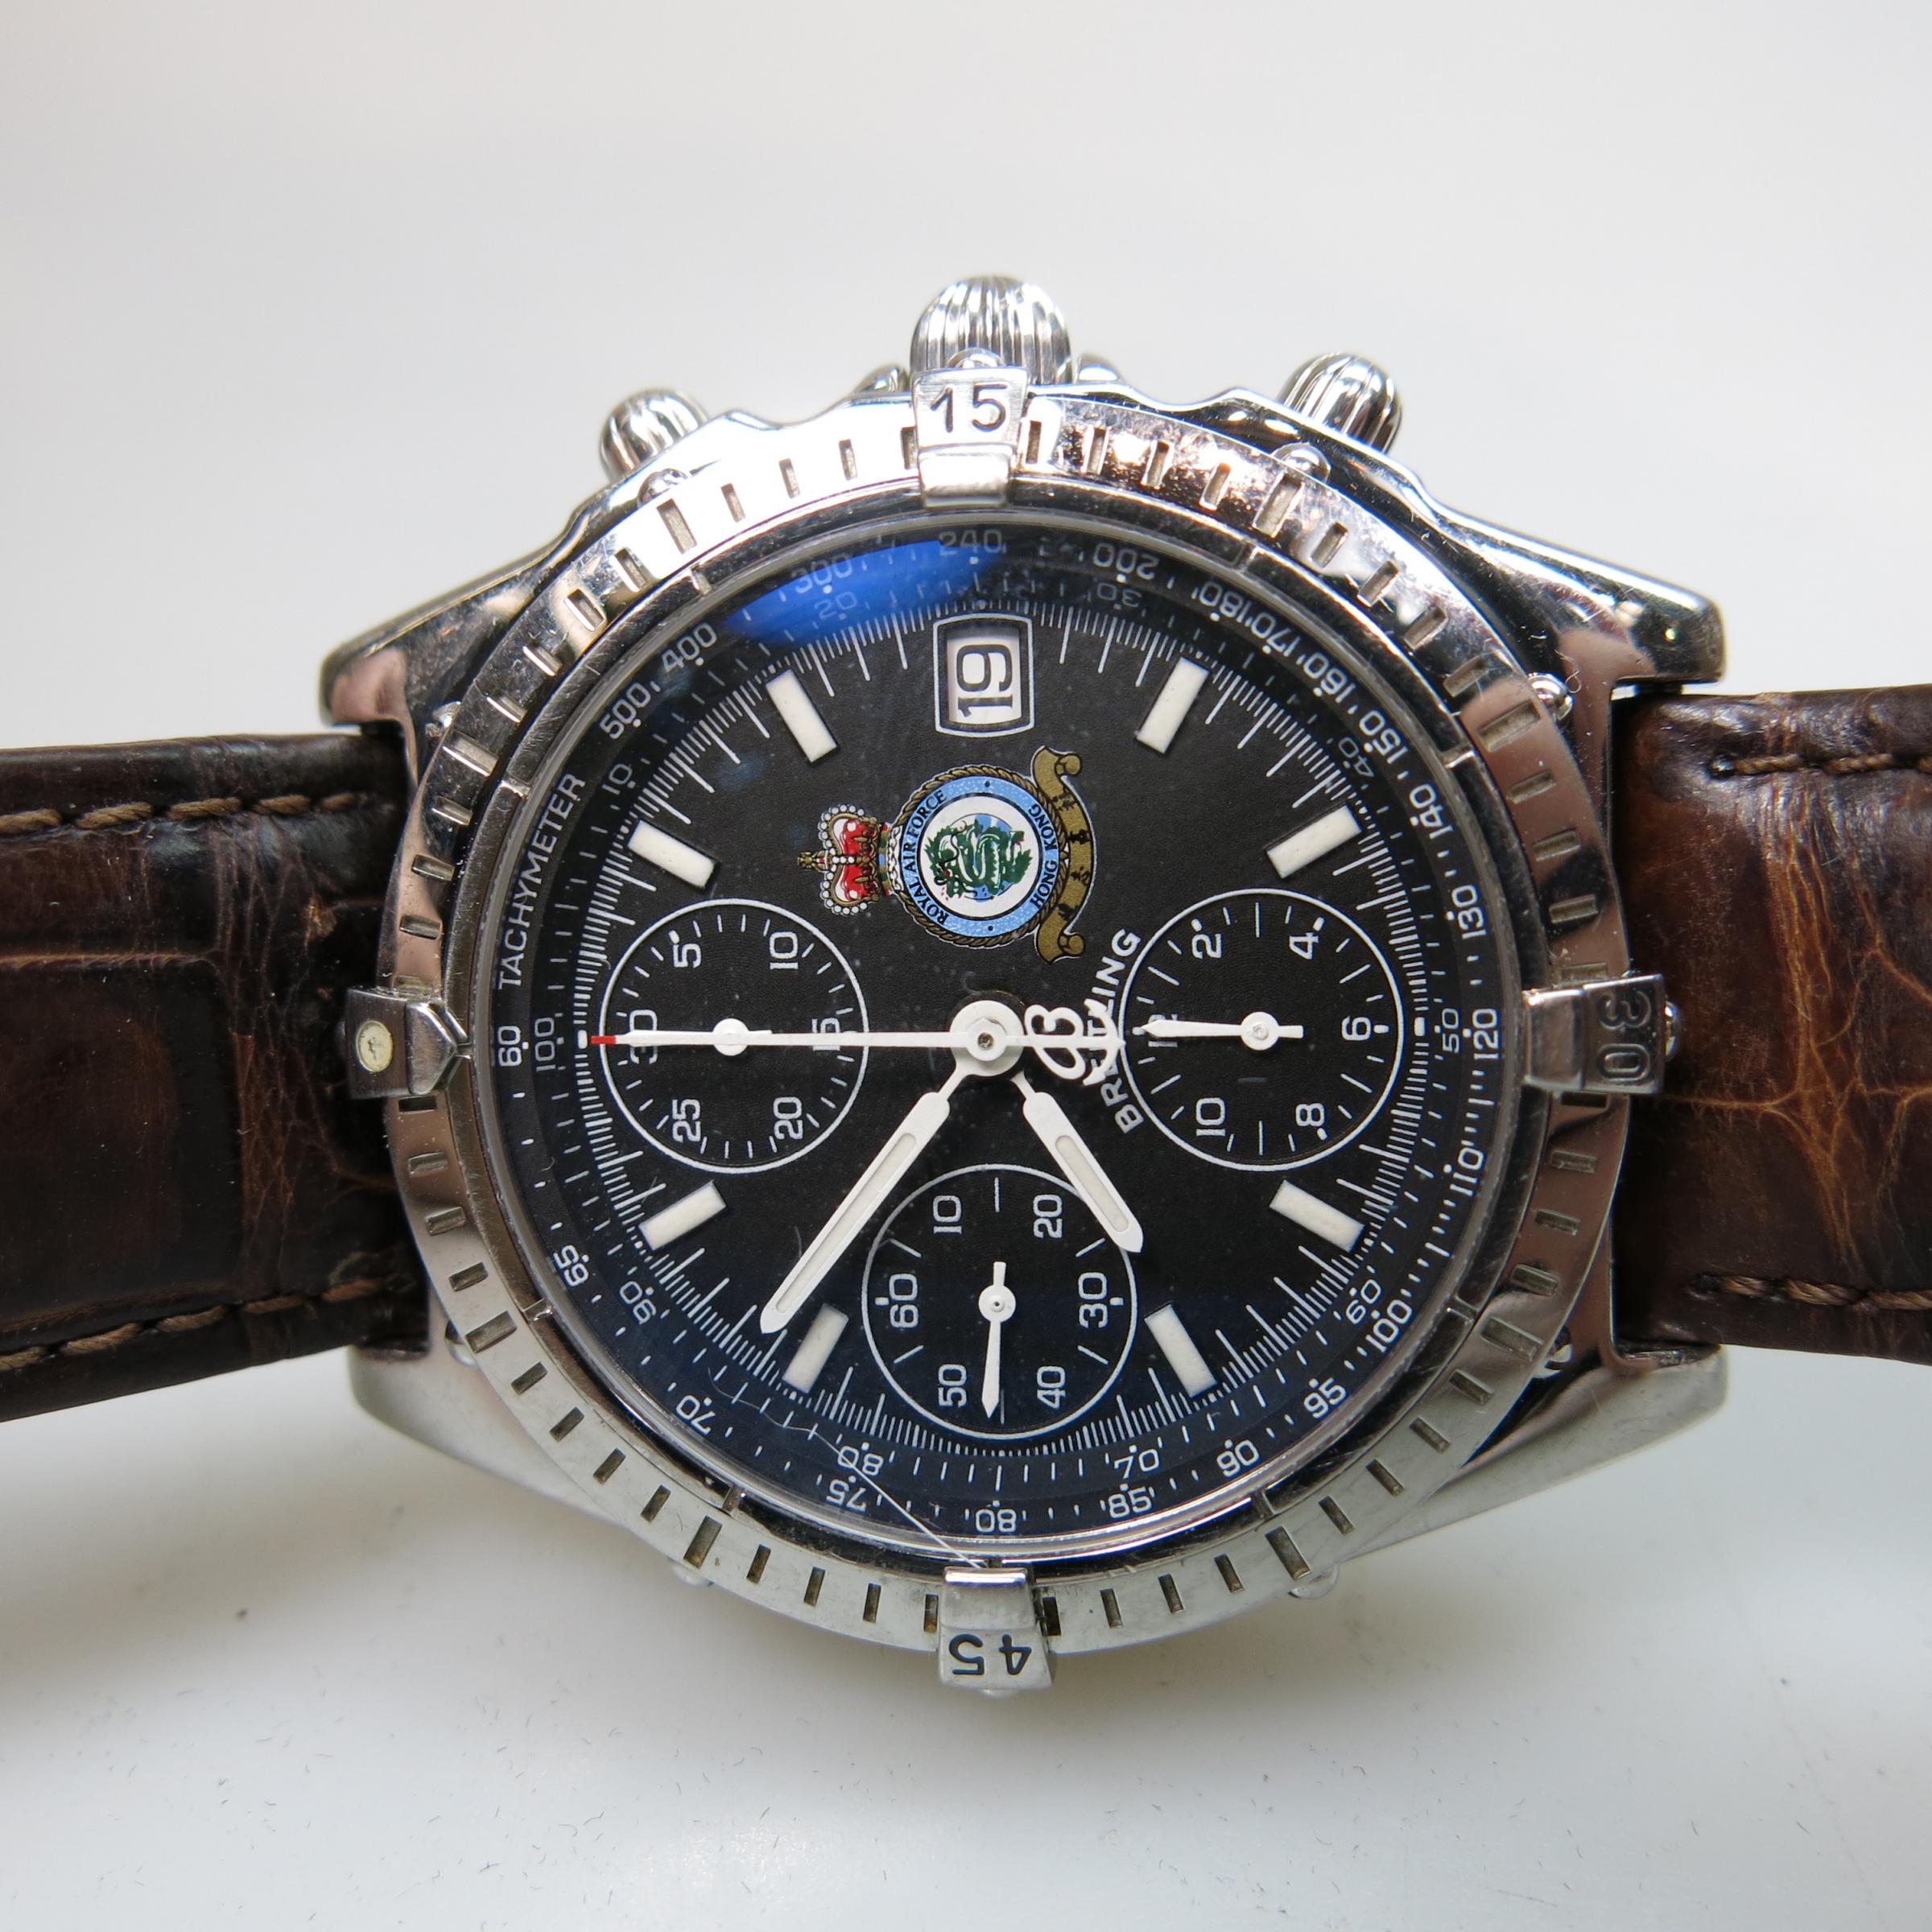 Breitling Chronomat 'Royal Air Force - Hong Kong' Wristwatch With Date And Chronograph